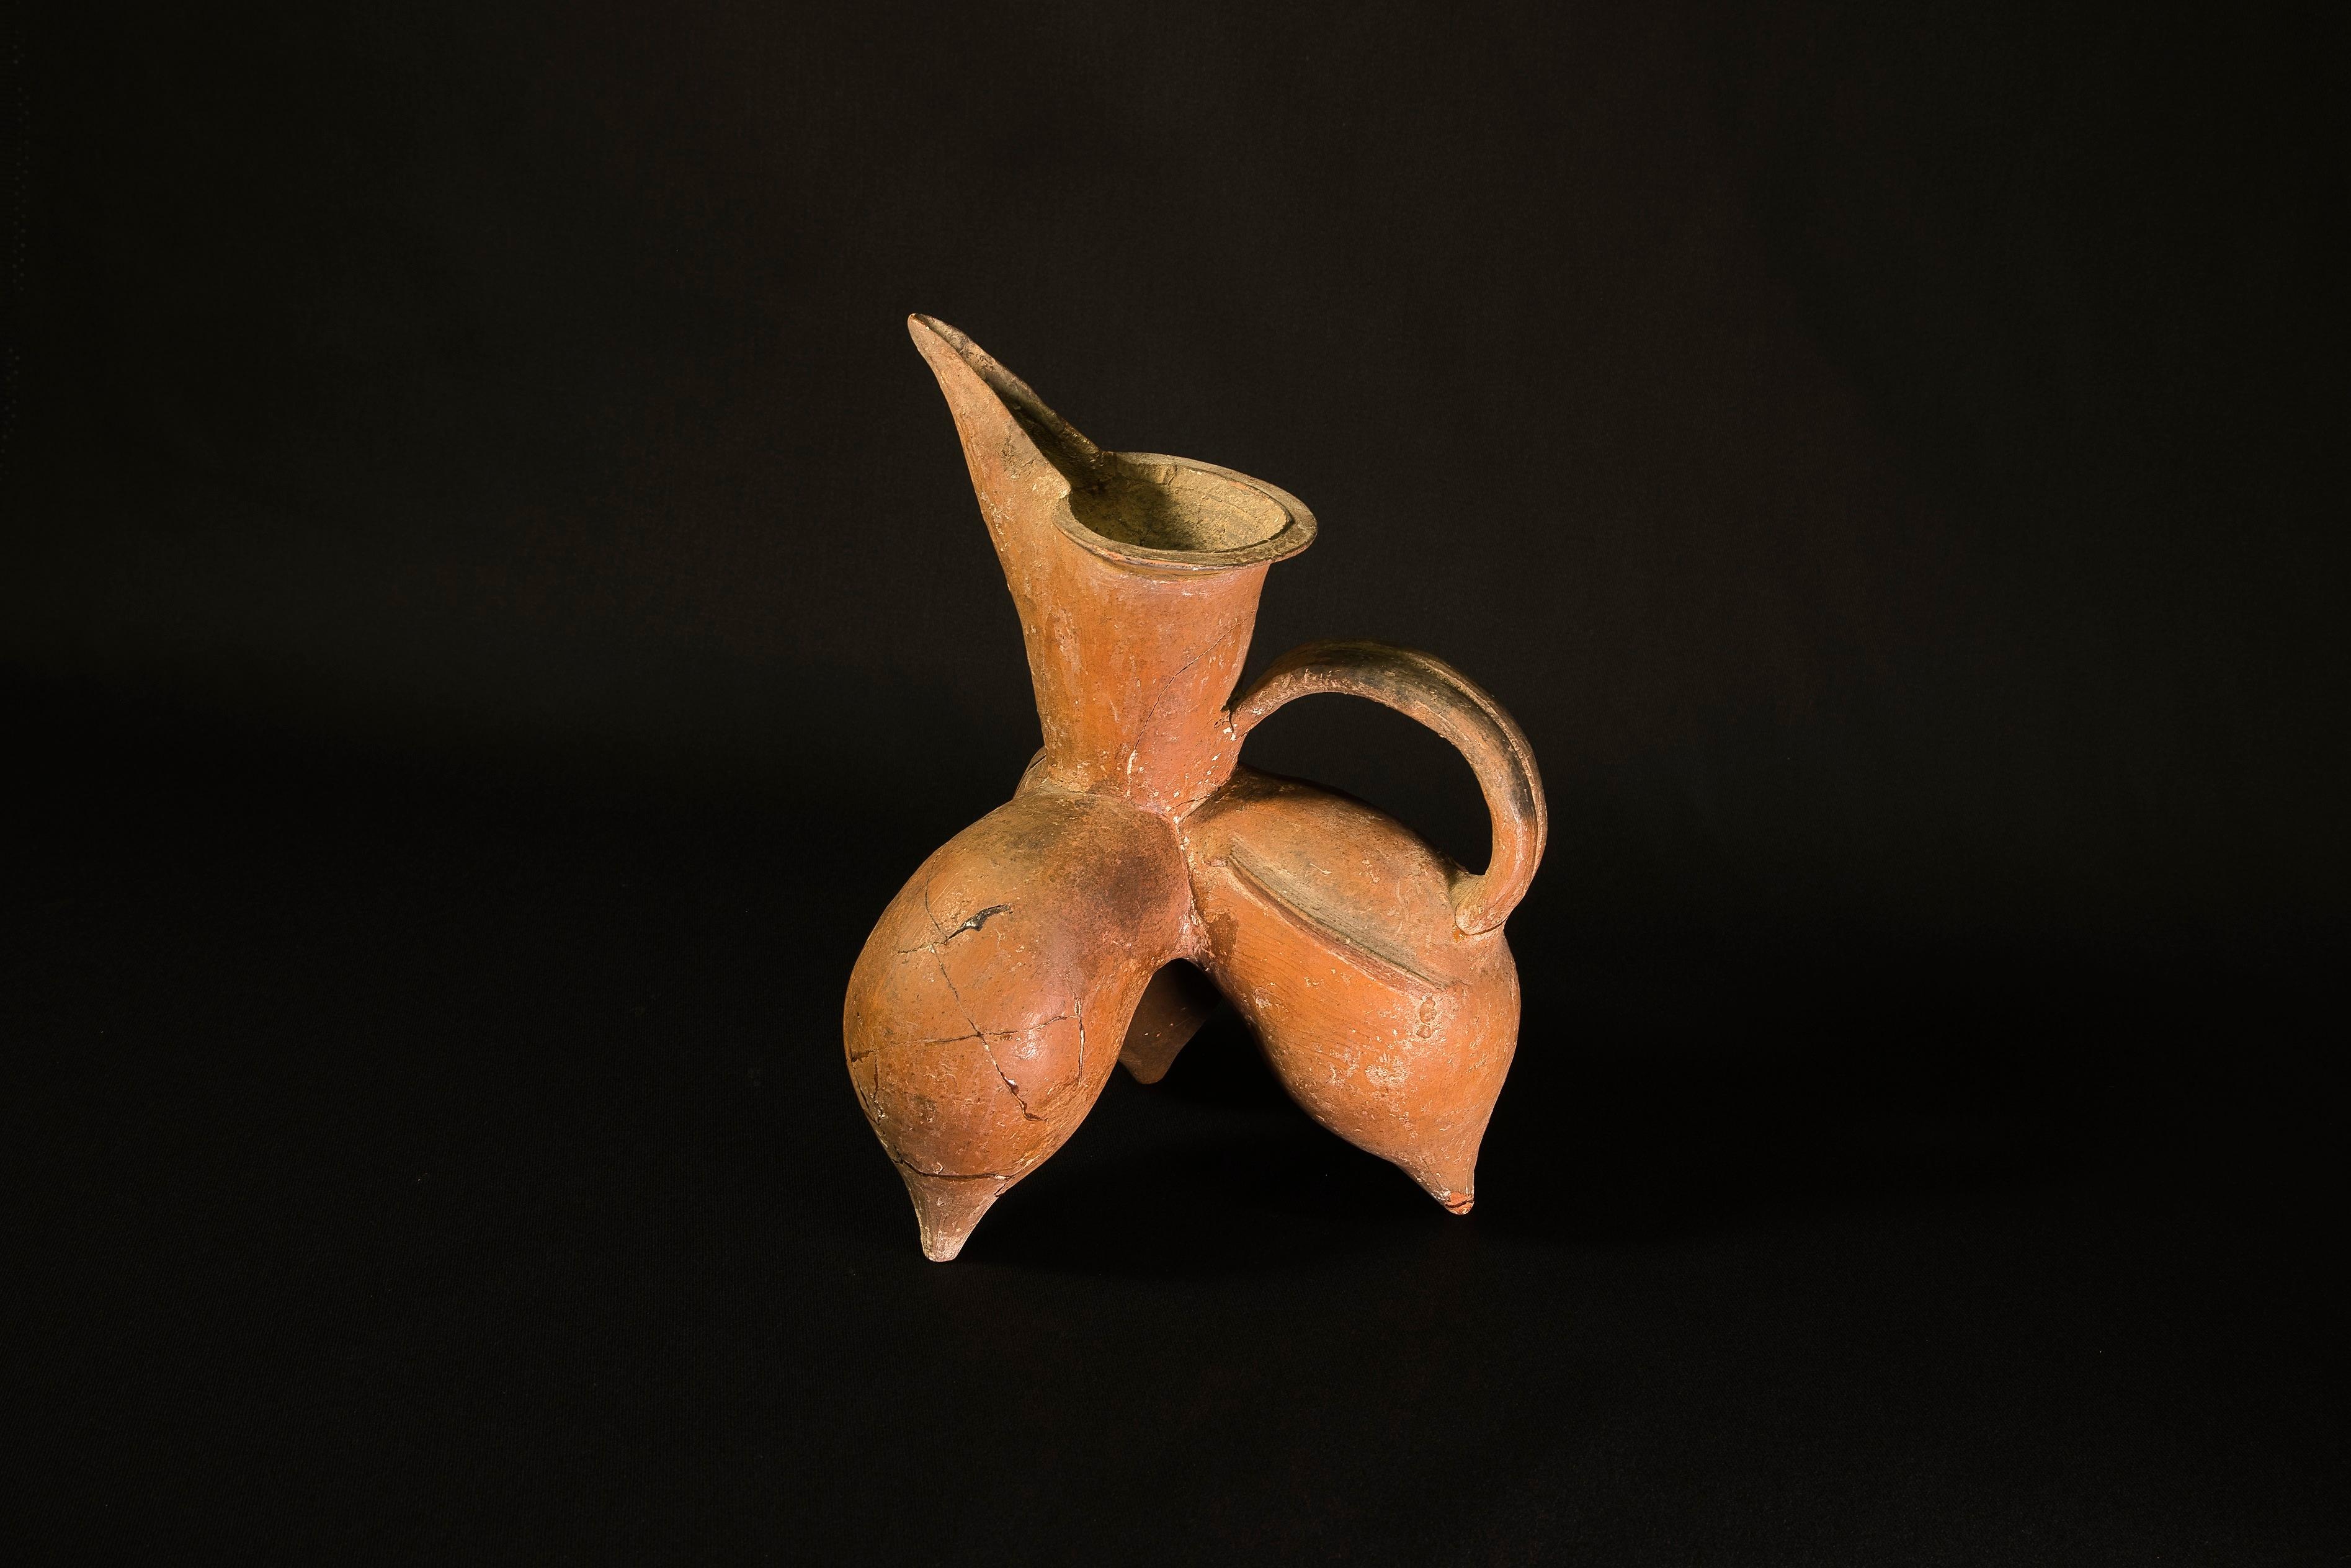 The "Harmony of Rites and Music: Exploring the Qilu Culture through Shandong Relics" exhibition opened today (May 28). Photo shows the "red pottery 'gui' with bag-shaped legs", a representative object of prehistoric Shandong culture.